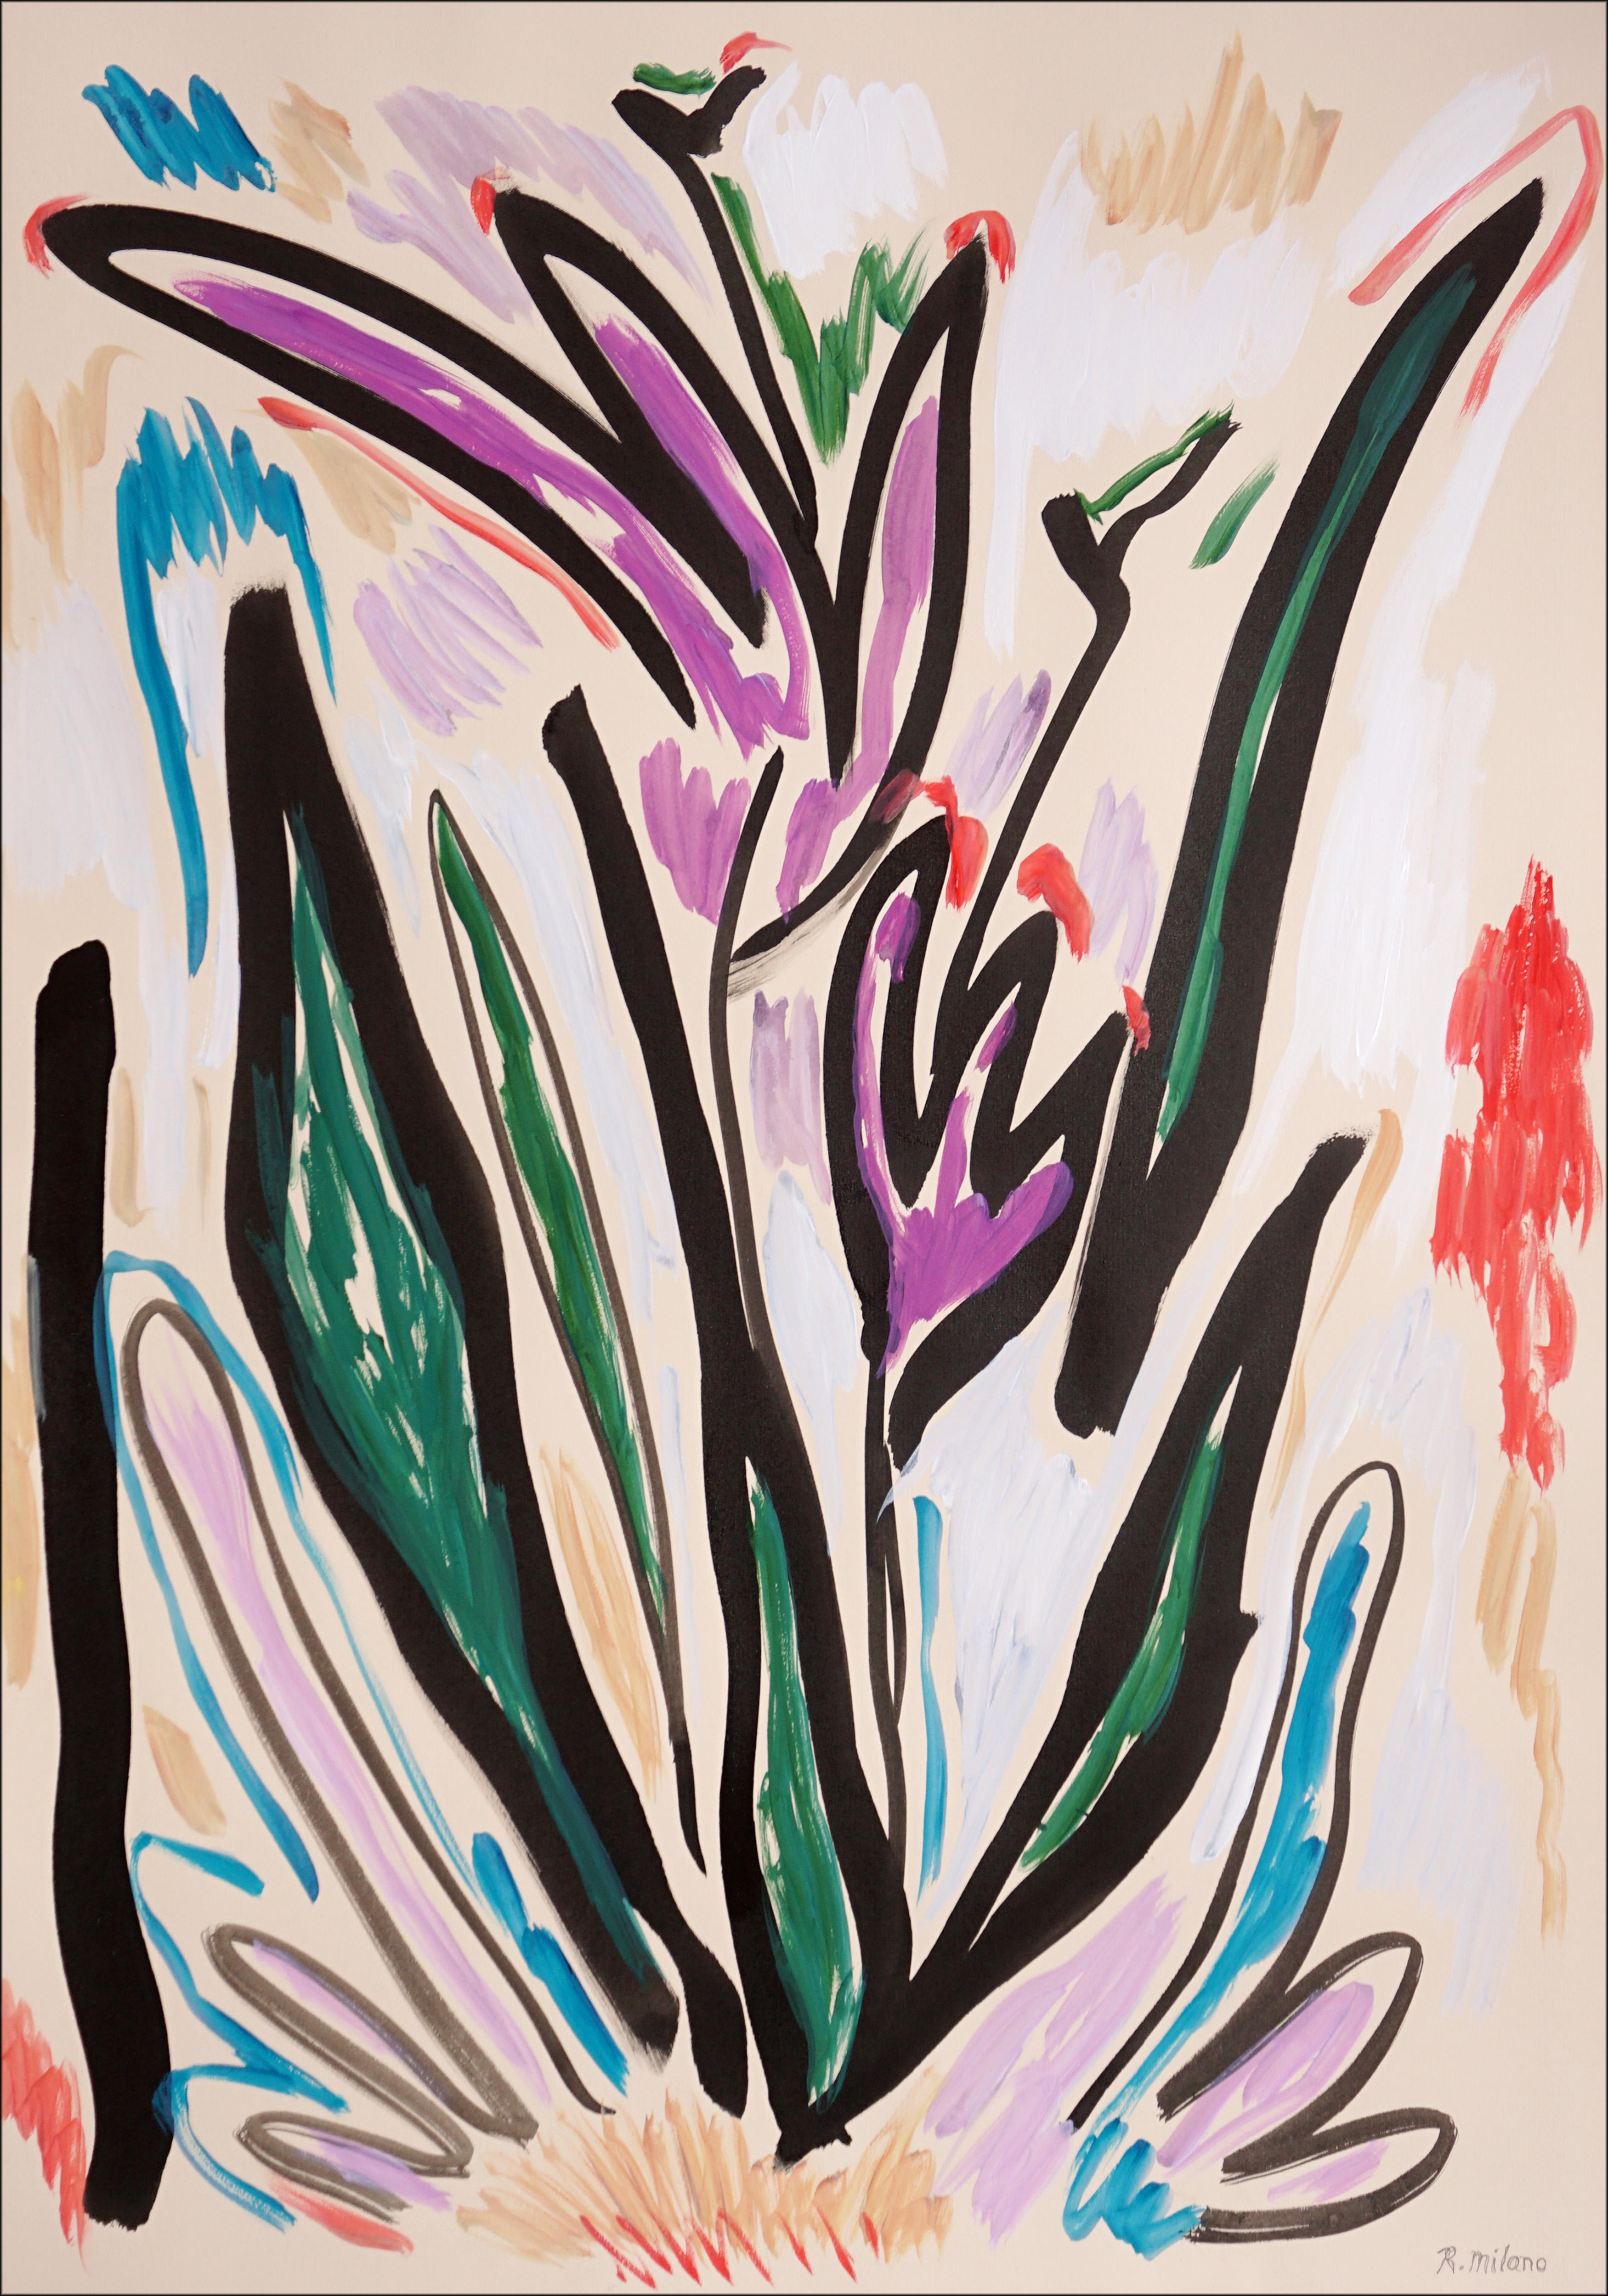 Romina Milano Abstract Painting - Purple Tulips, Abstract Expressionist Blooming Flowers, Vigorous Gestures, Flora